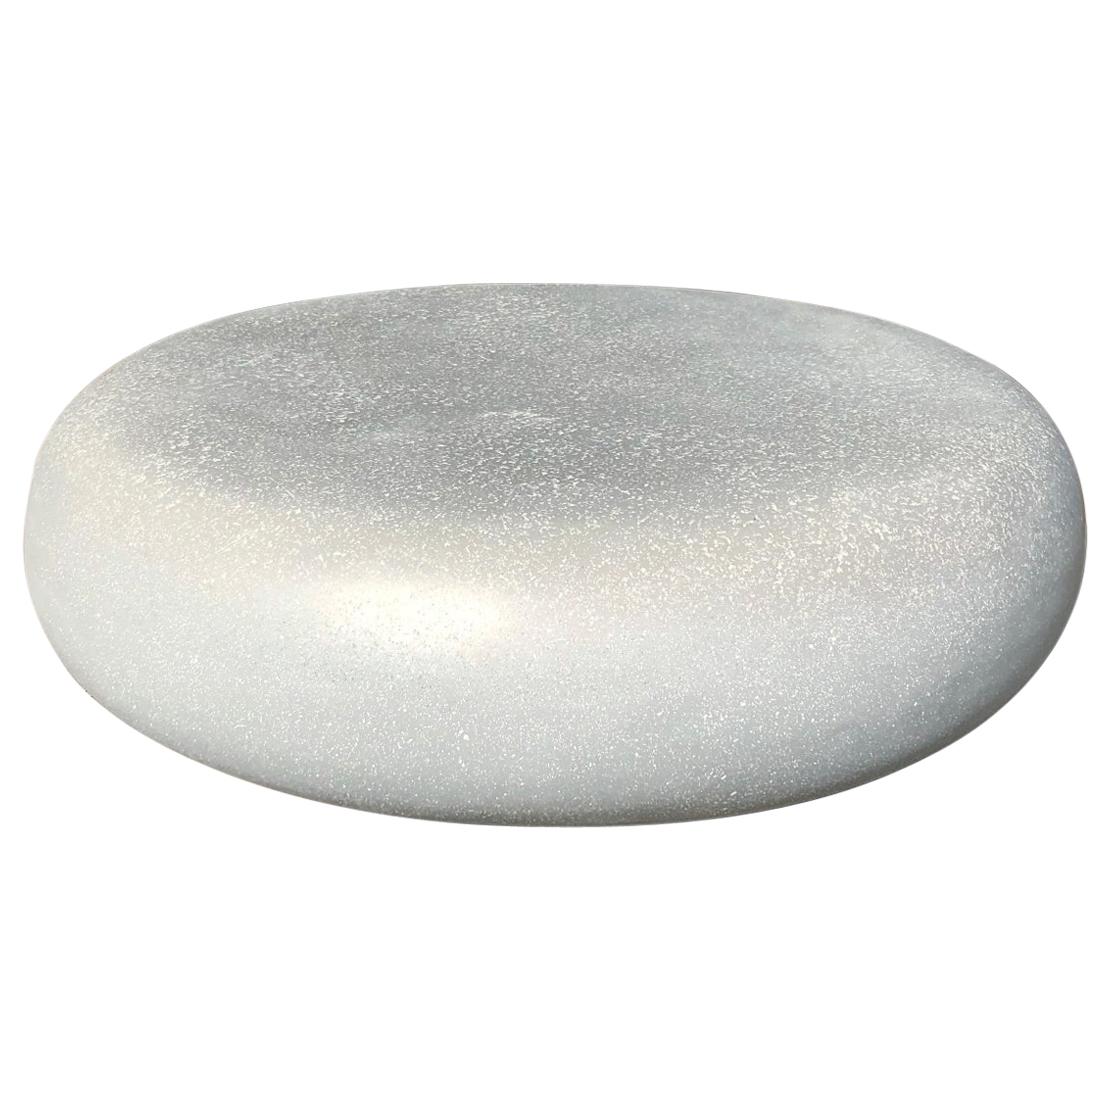 Cast Resin 'Pebble' Low Table, Keystone Finish by Zachary A. Design For Sale